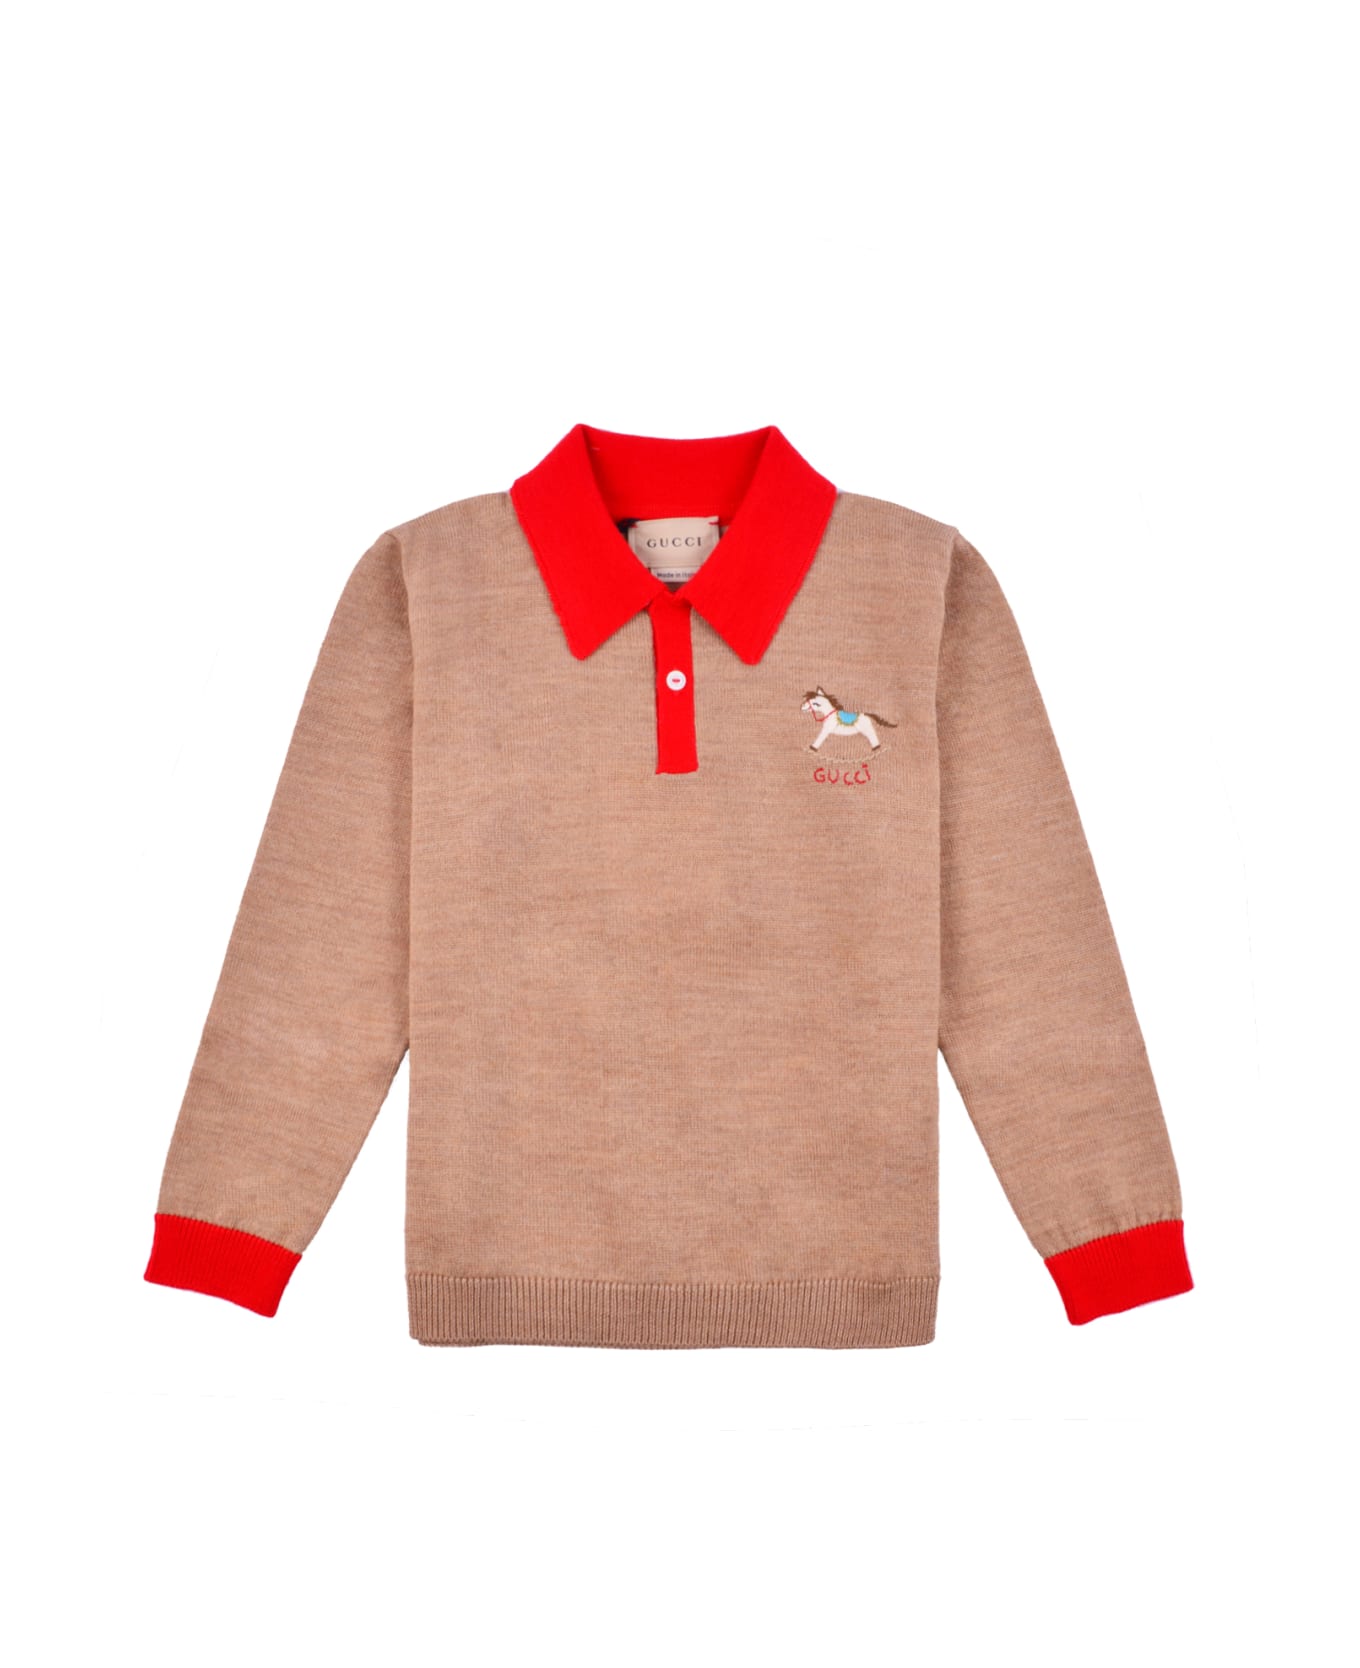 Gucci Wool Polo With Embroidery - Beige